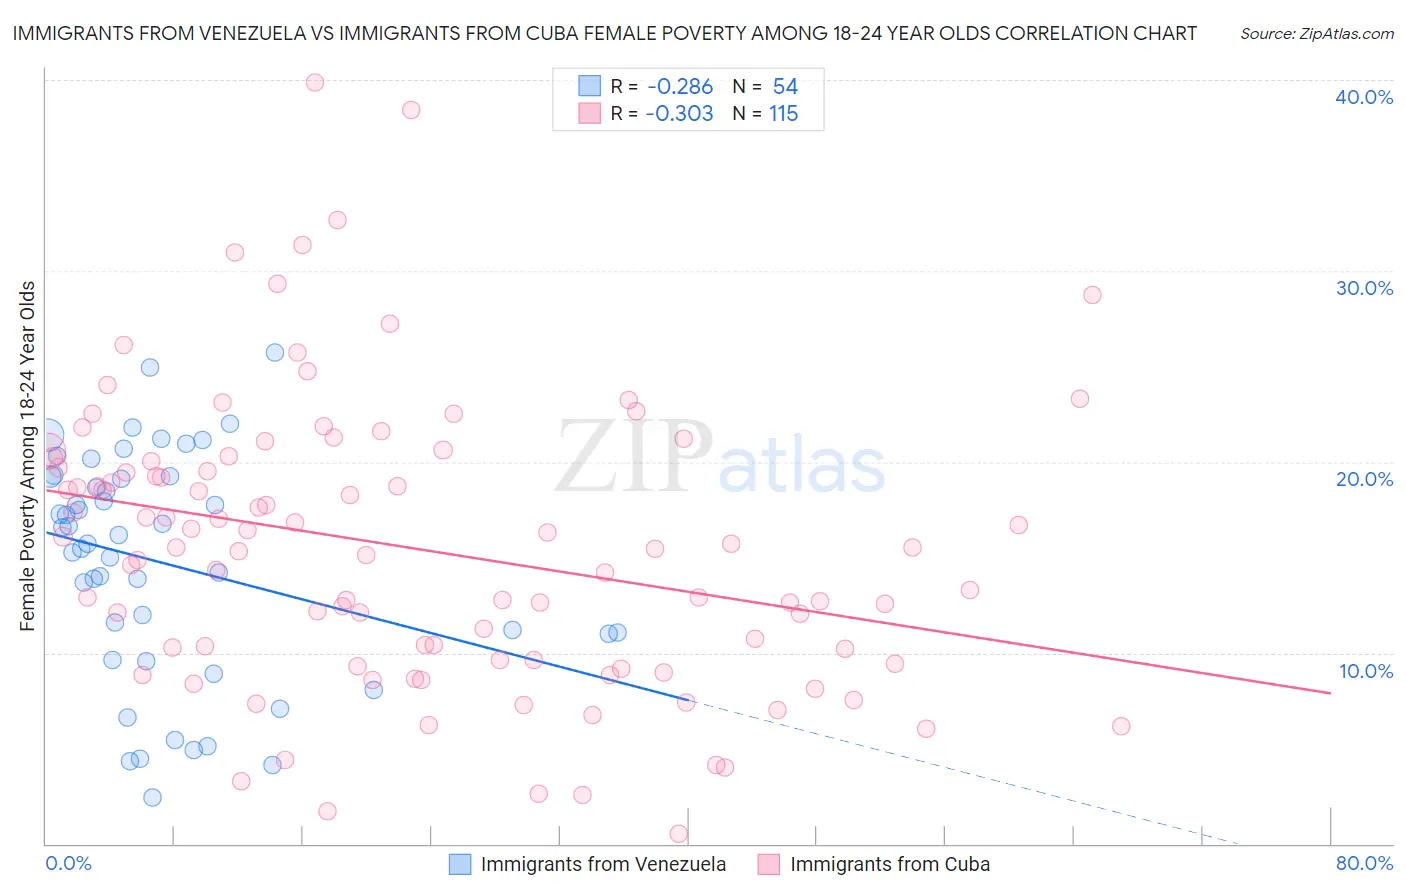 Immigrants from Venezuela vs Immigrants from Cuba Female Poverty Among 18-24 Year Olds